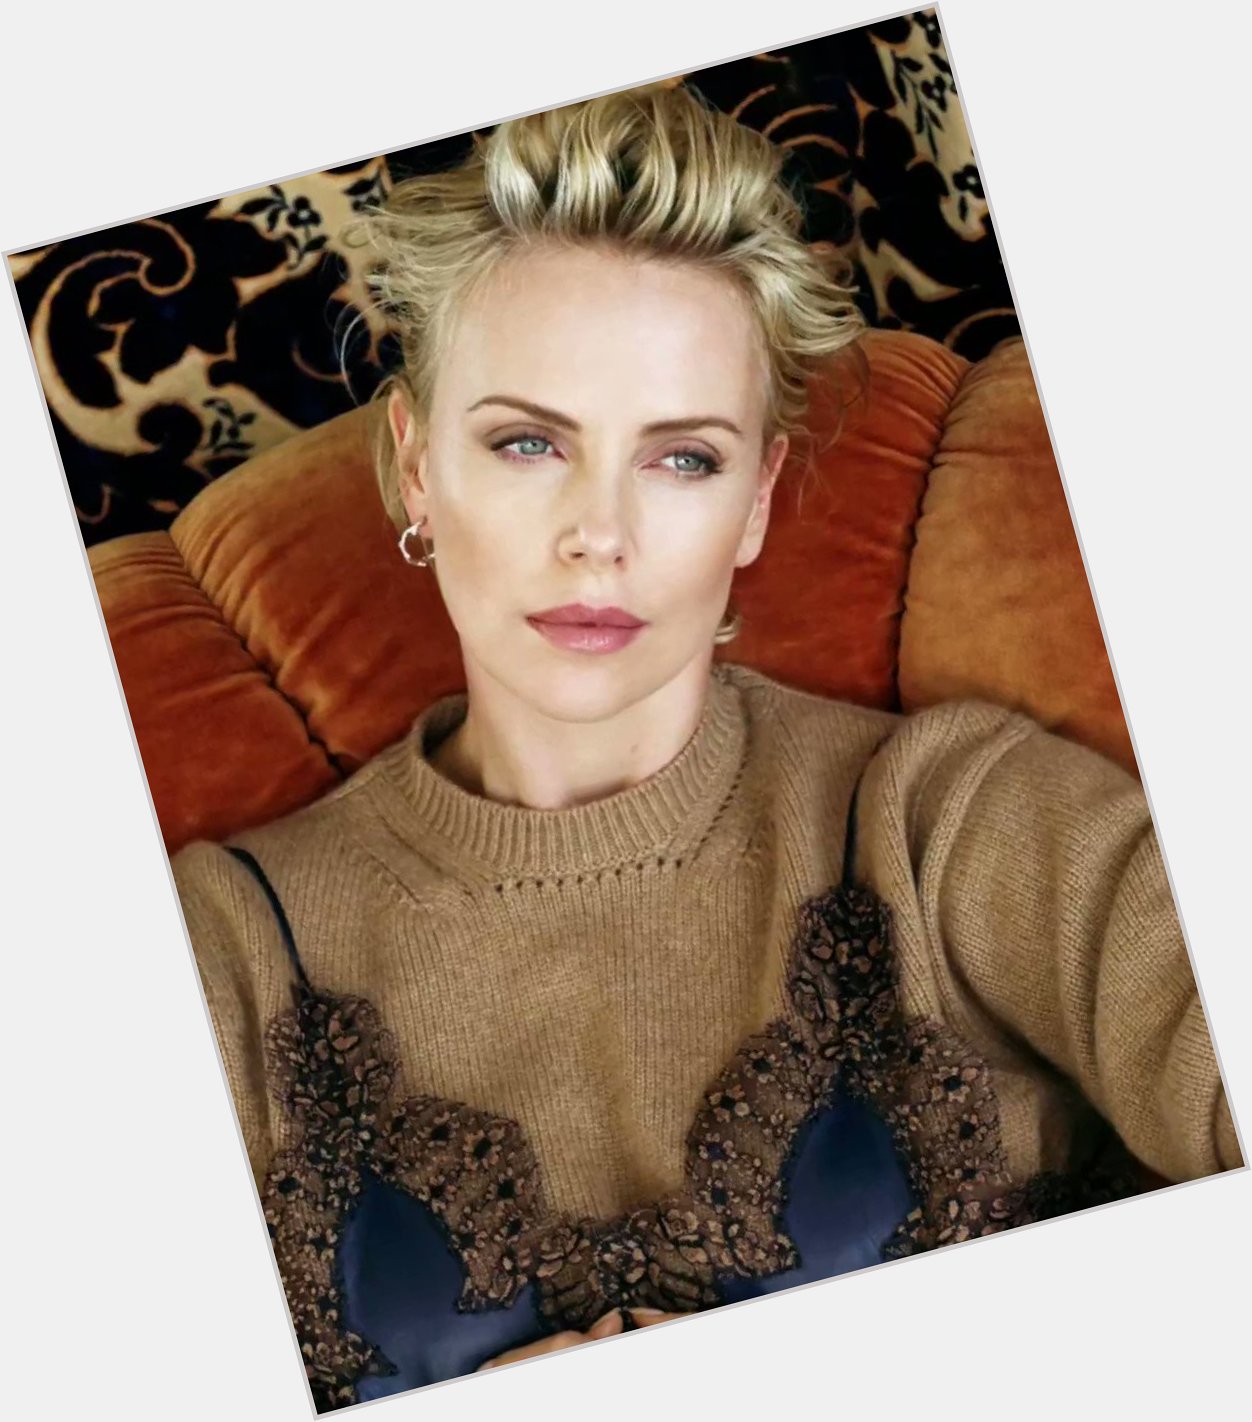 Happy Birthday to Charlize Theron!  From glamour queen to badass action star, she only gets better with age.  